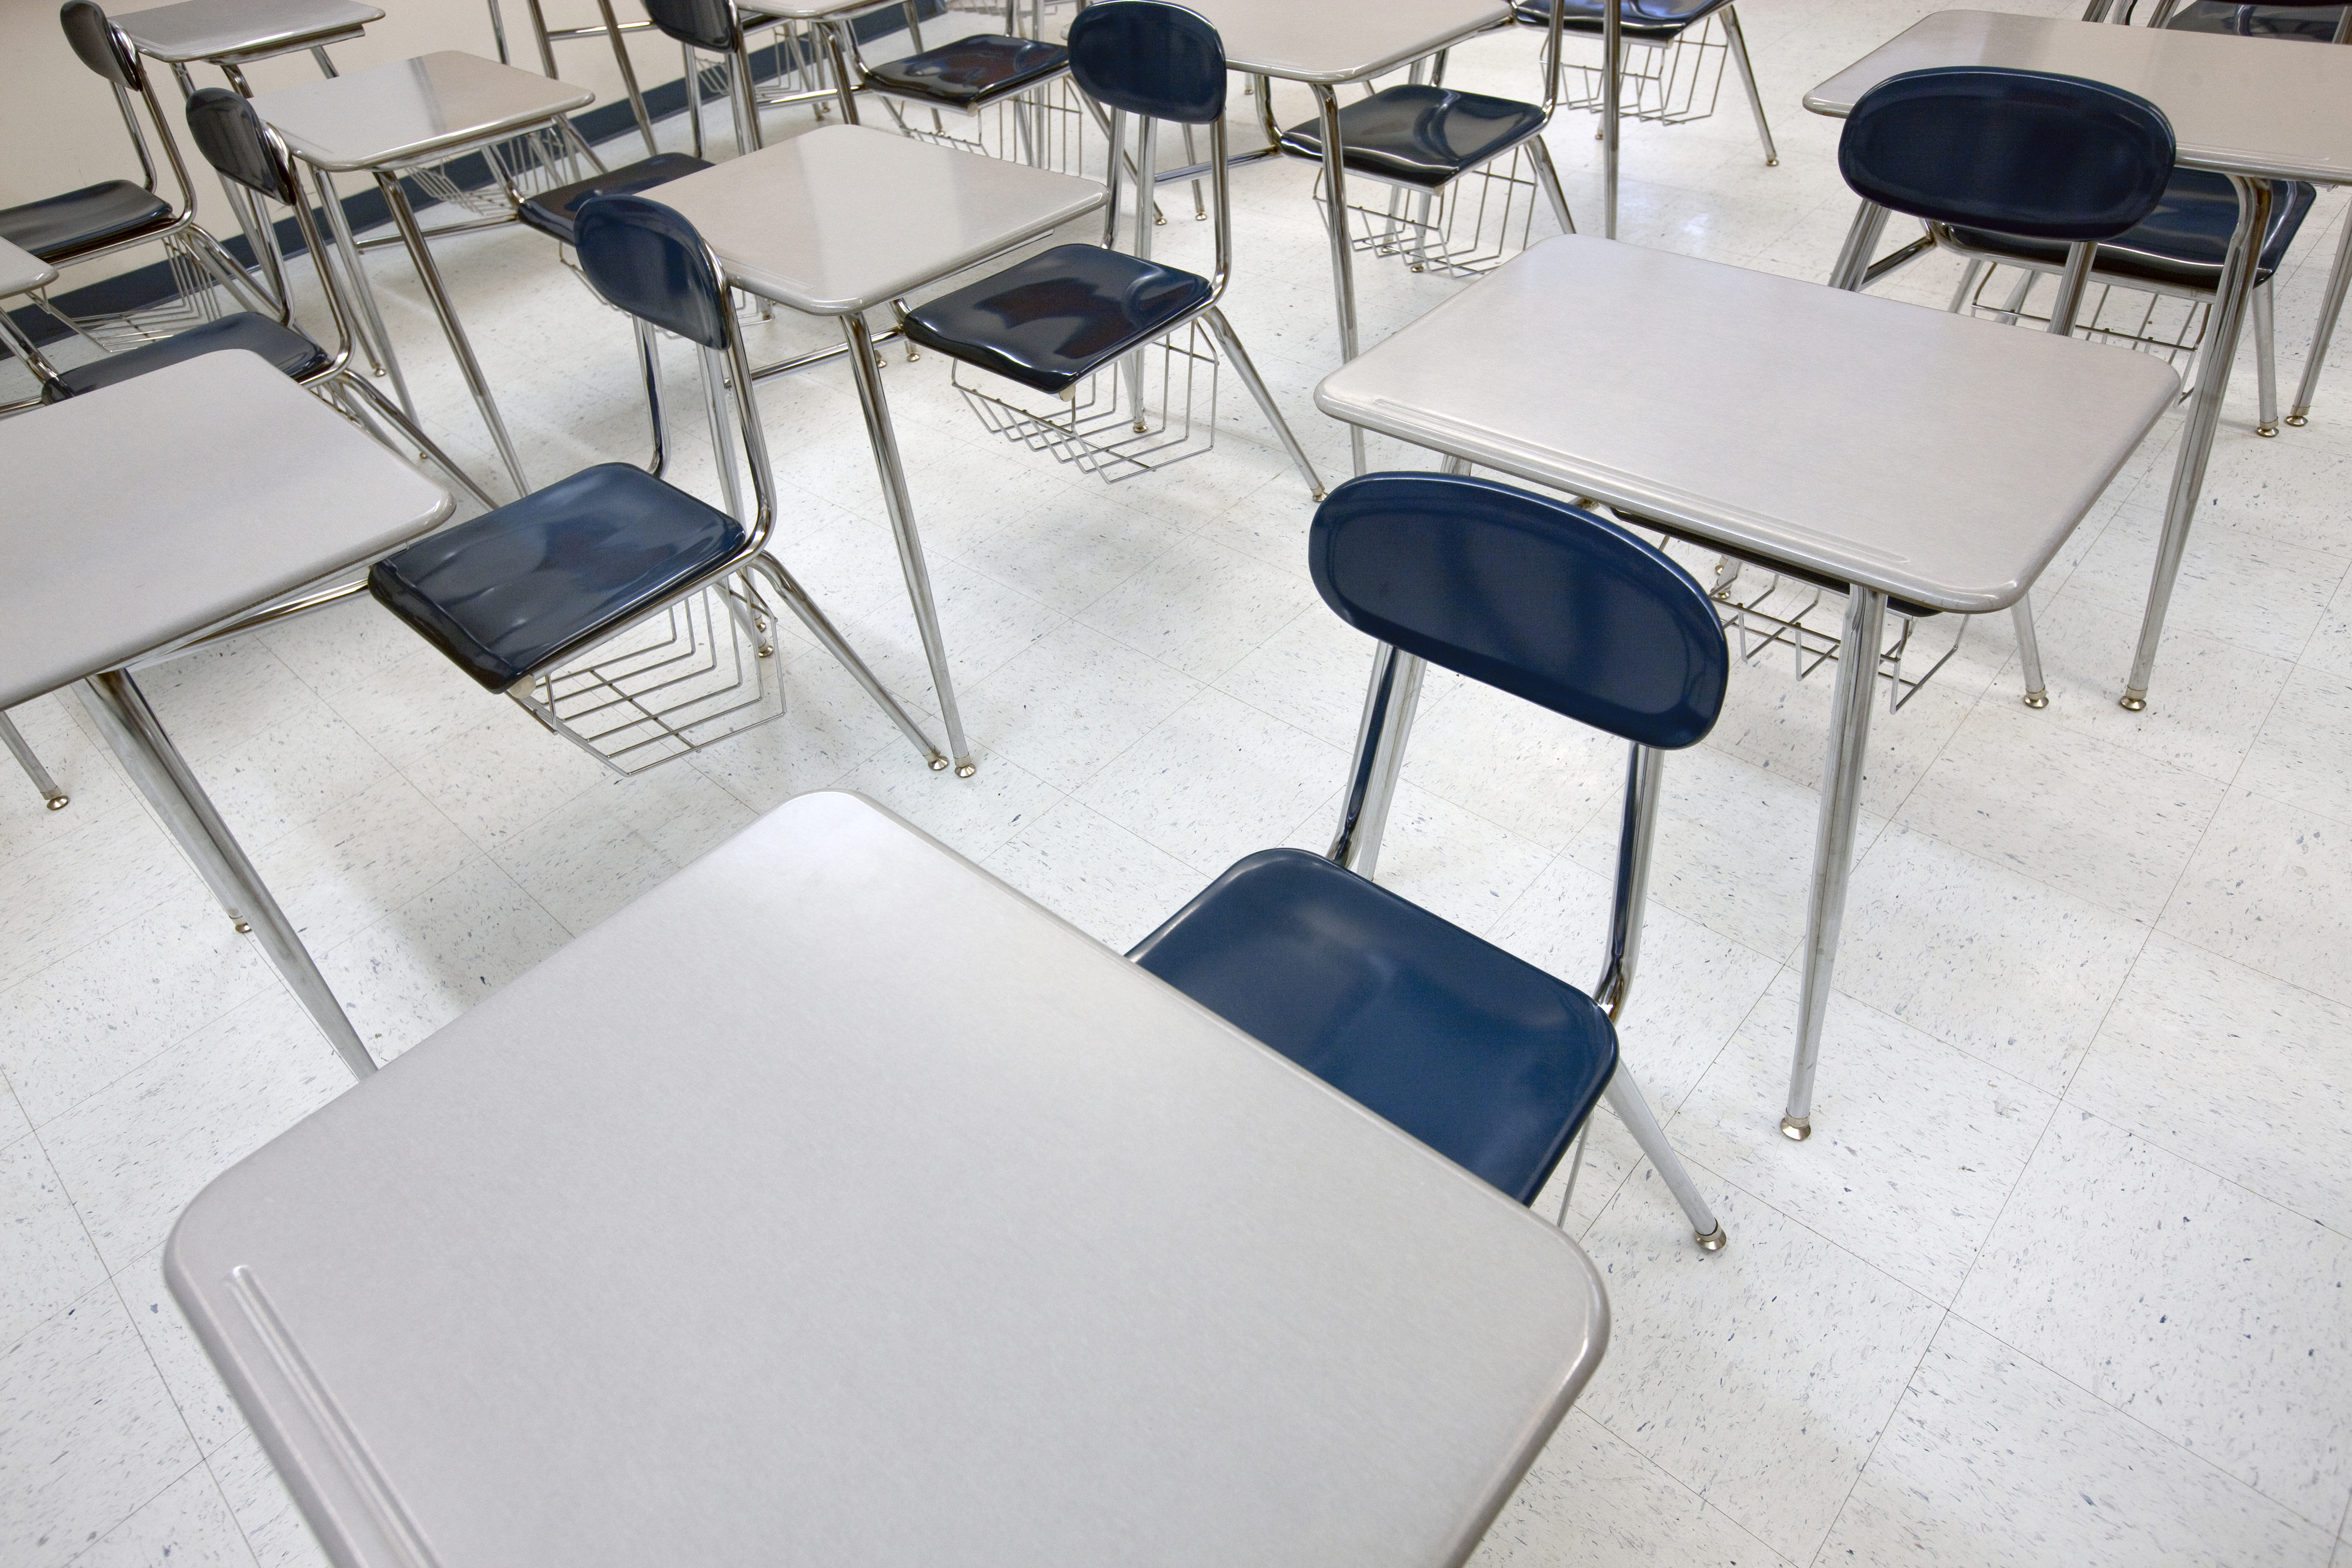 Empty chairs and desks in a classroom